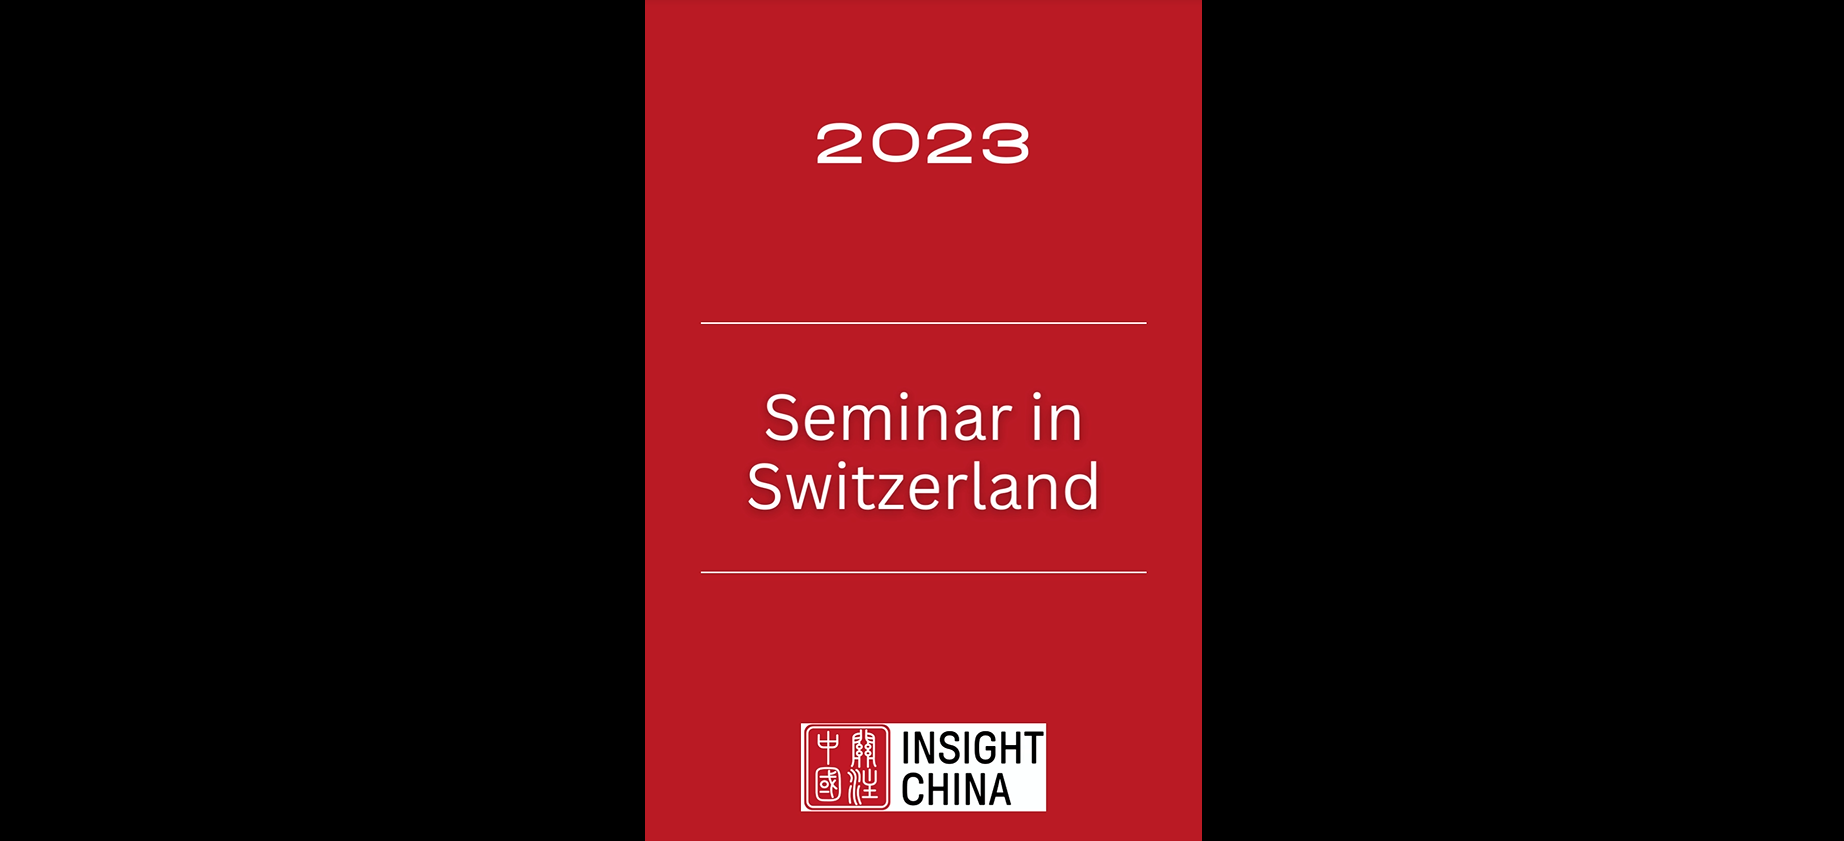 You are currently viewing Seminar in Switzerland 2023